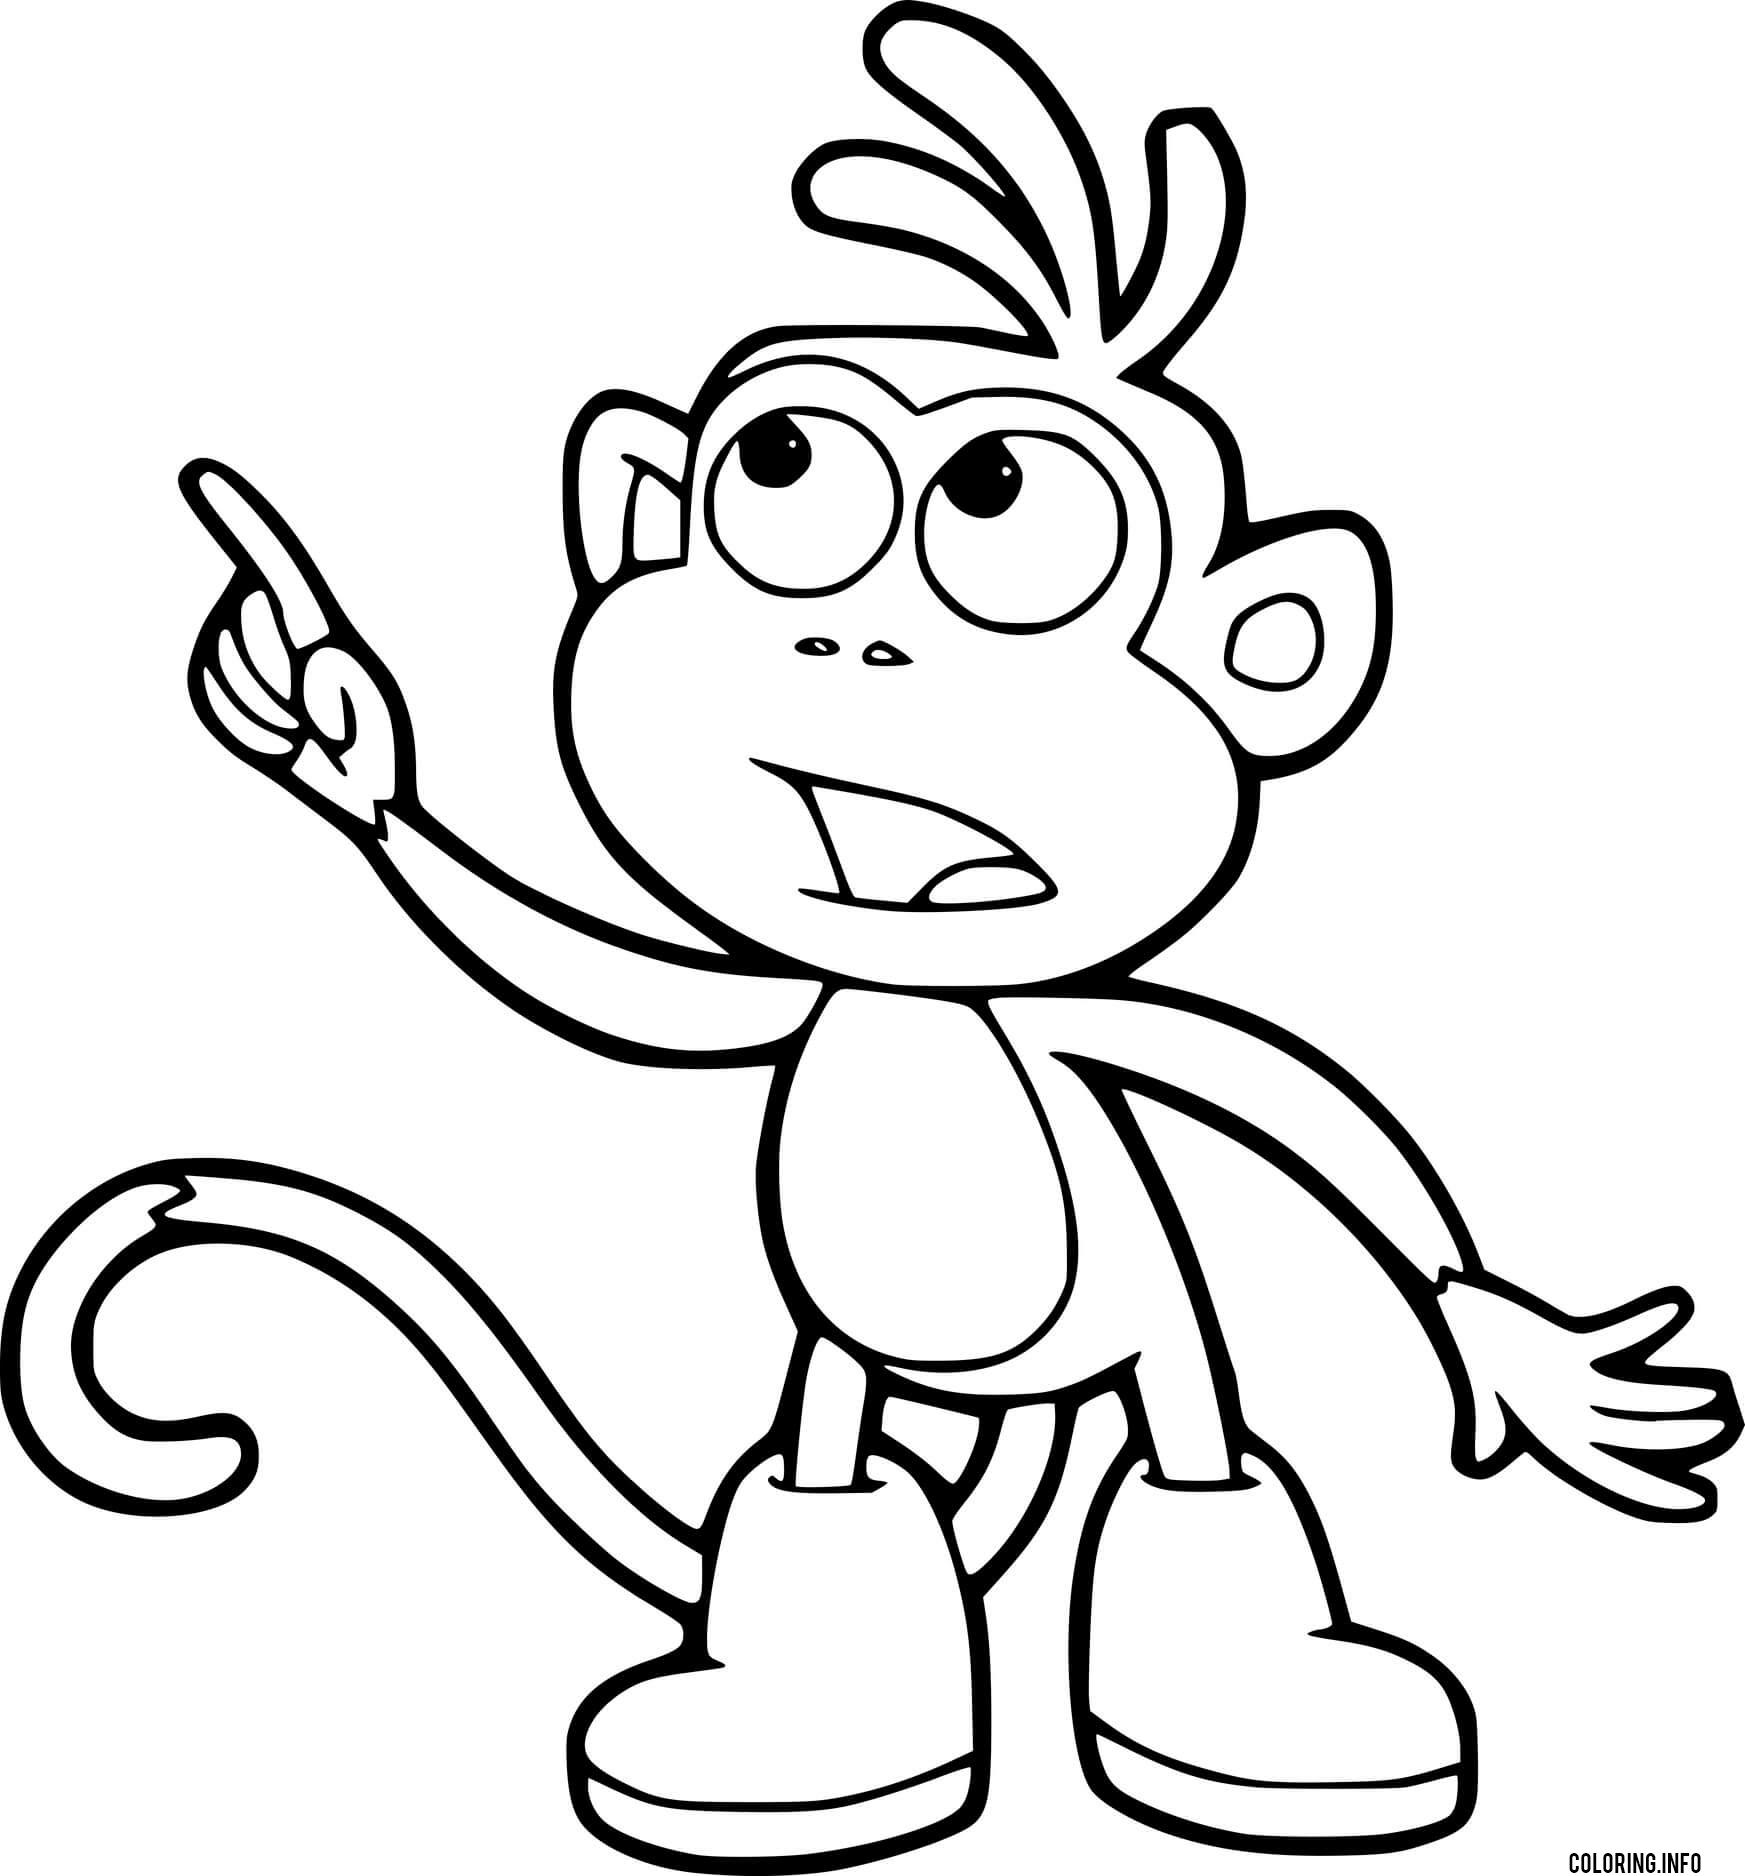 Monkey Pointing Up Coloring page Printable